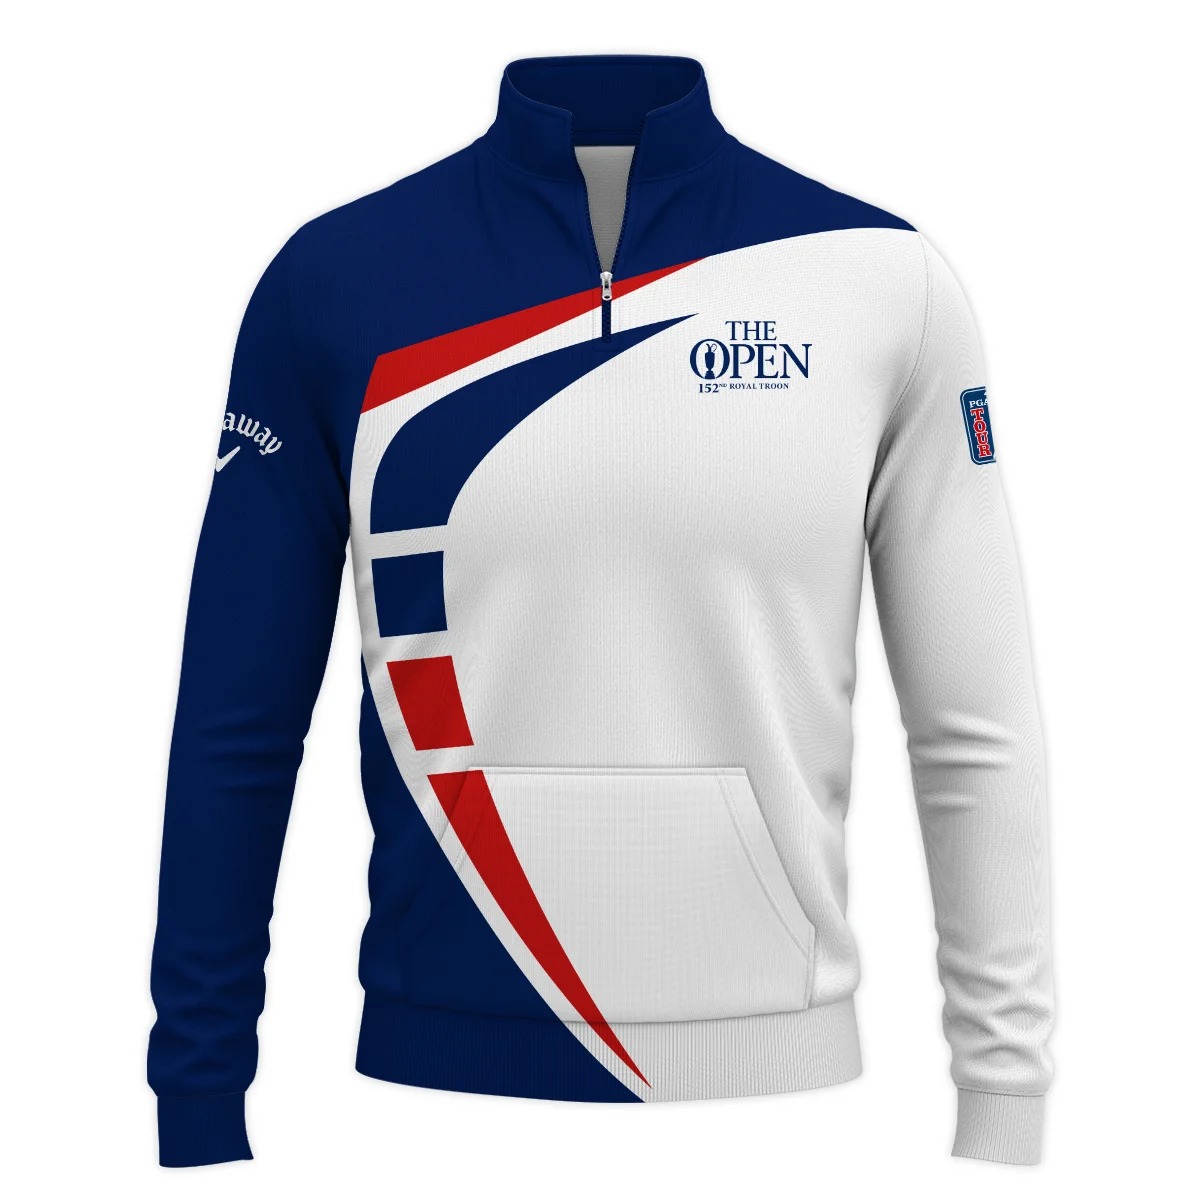 152nd Open Championship Callaway White Blue Red Pattern Background Quarter-Zip Jacket All Over Prints HOTOP270624A03CLWSWZ